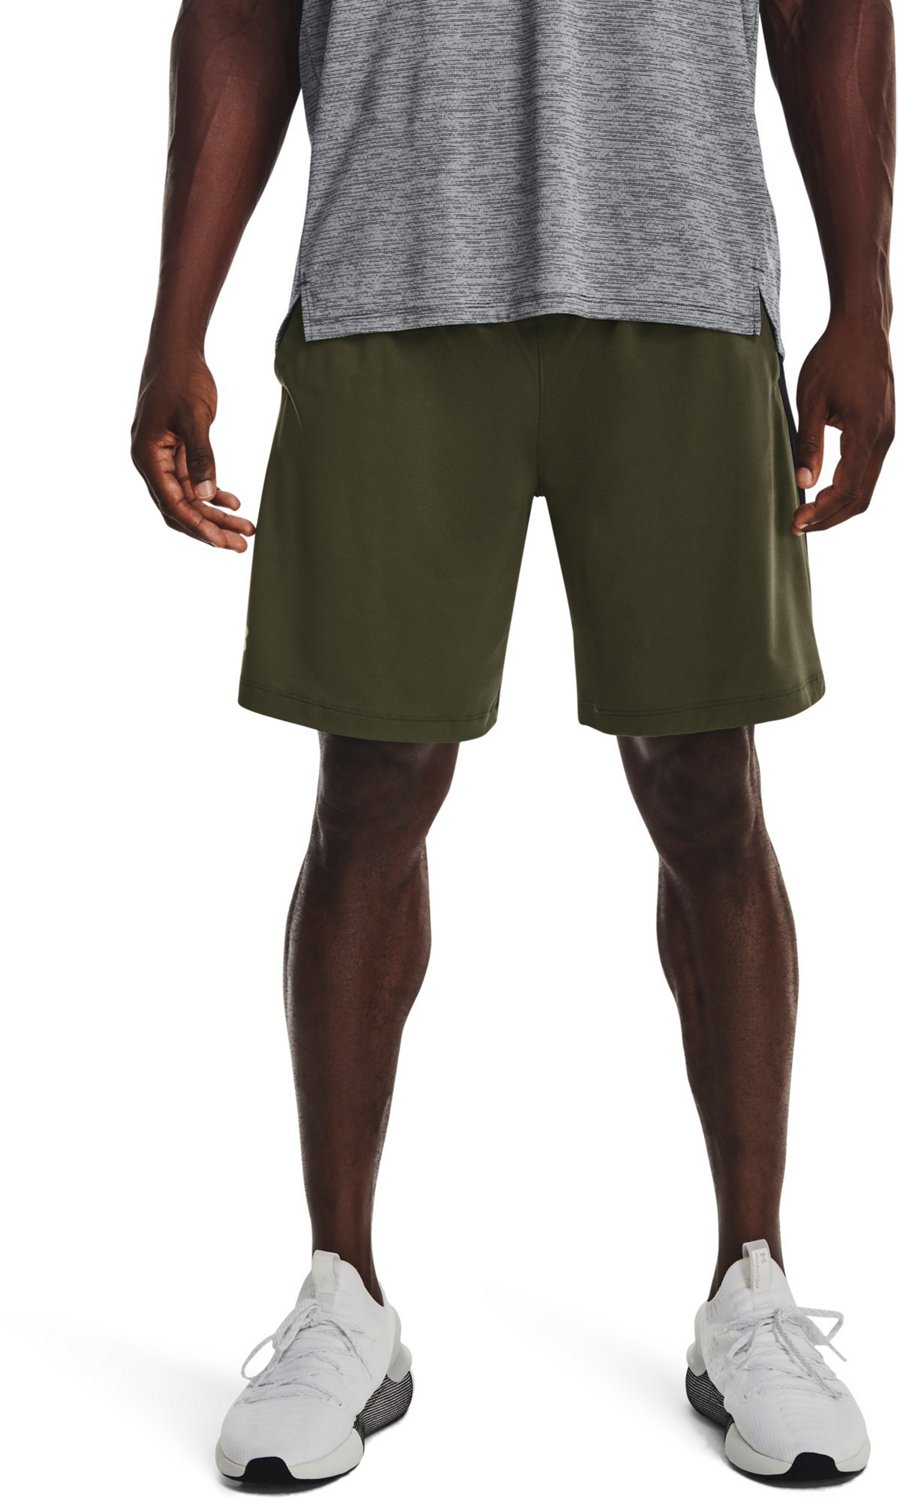 Under Armour Men's Tech Vent Shorts 8 in